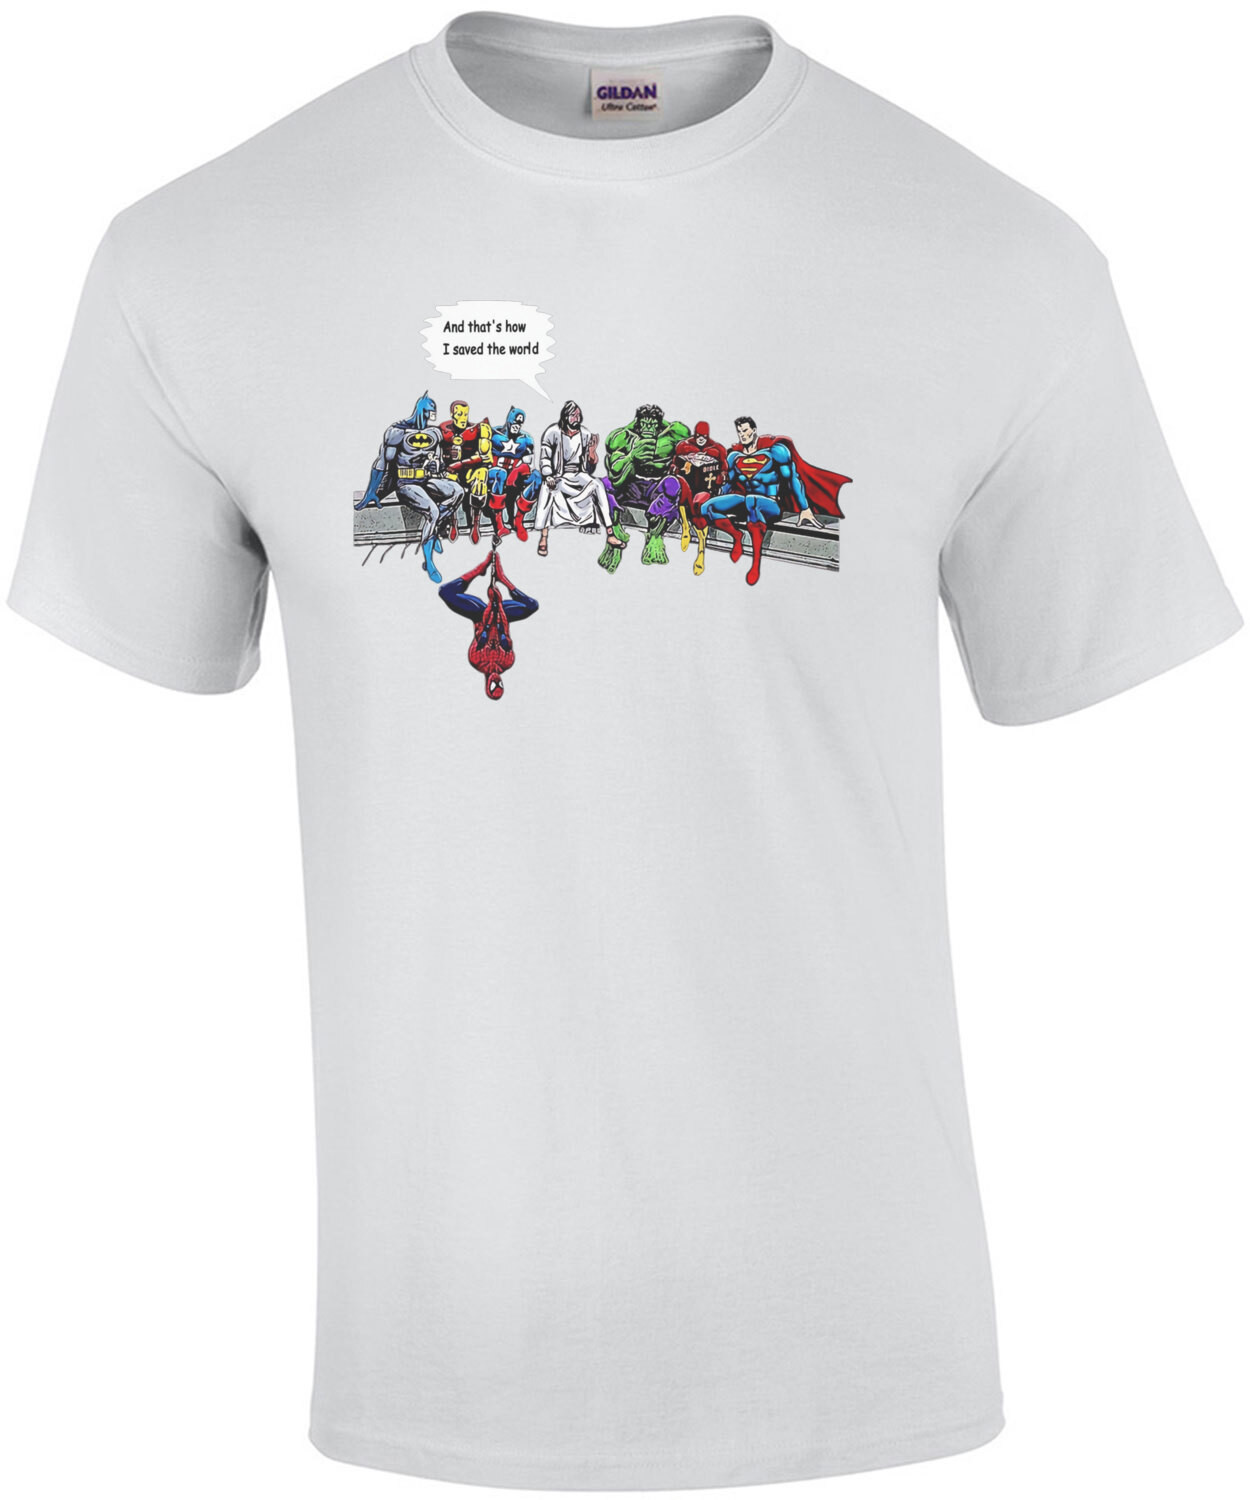 Jesus and the Superheros - And That's how I saved the world. Funny Jesus Religion T-Shirt